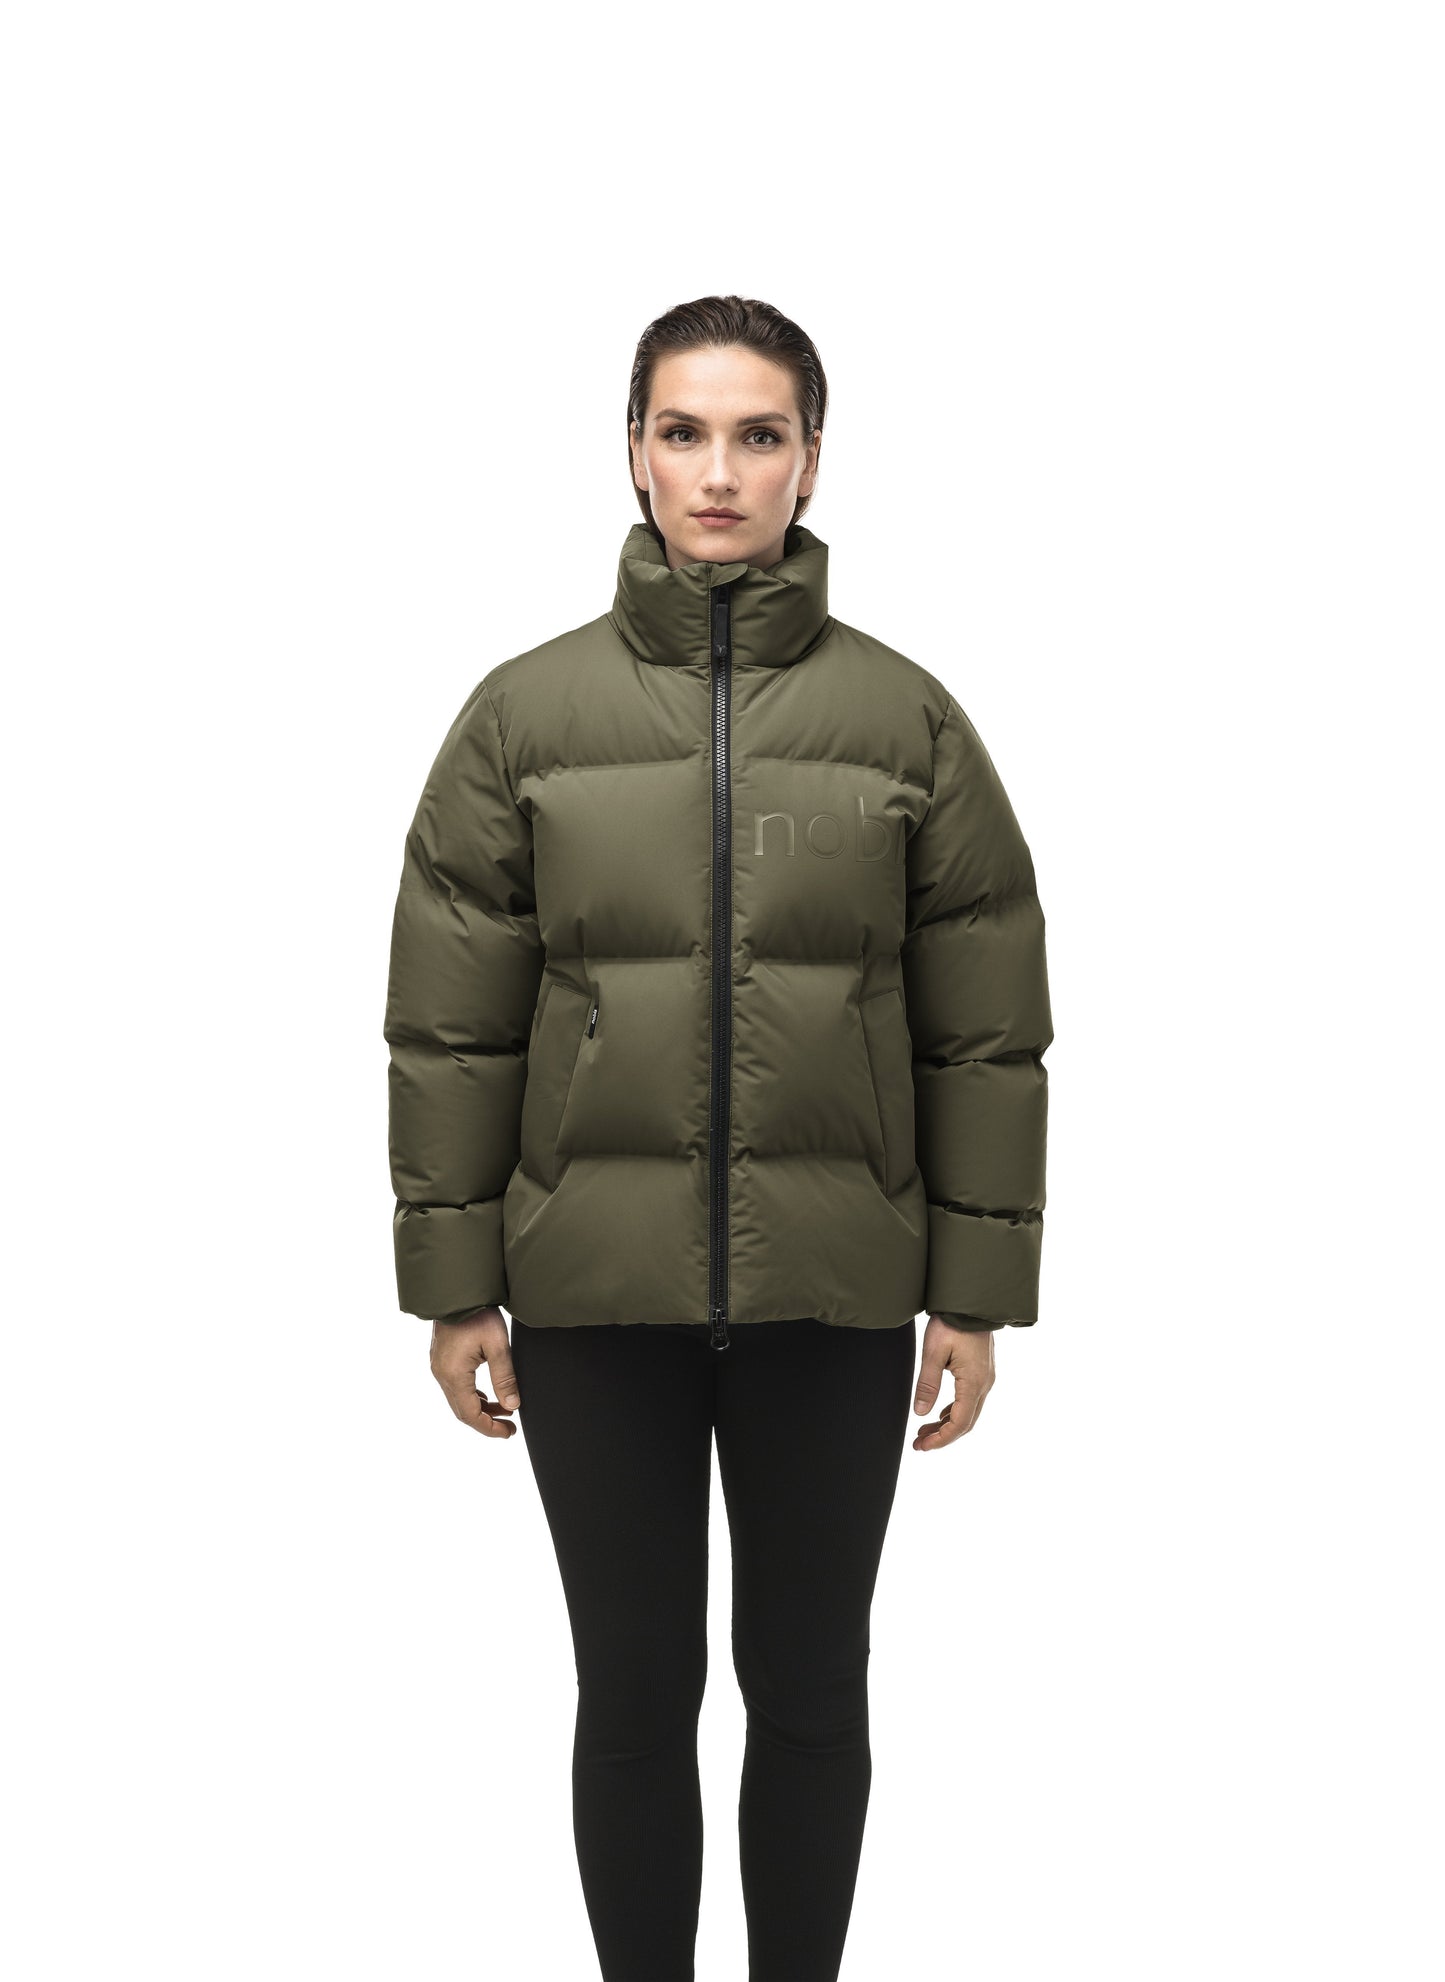 Women's puffer jacket with a minimalist modern design; featuring graphic details like oversized tonal branding, an exposed zipper, and seamless puffer channels to lock in the Premium Canadian Origin White Duck Down in Fatigue